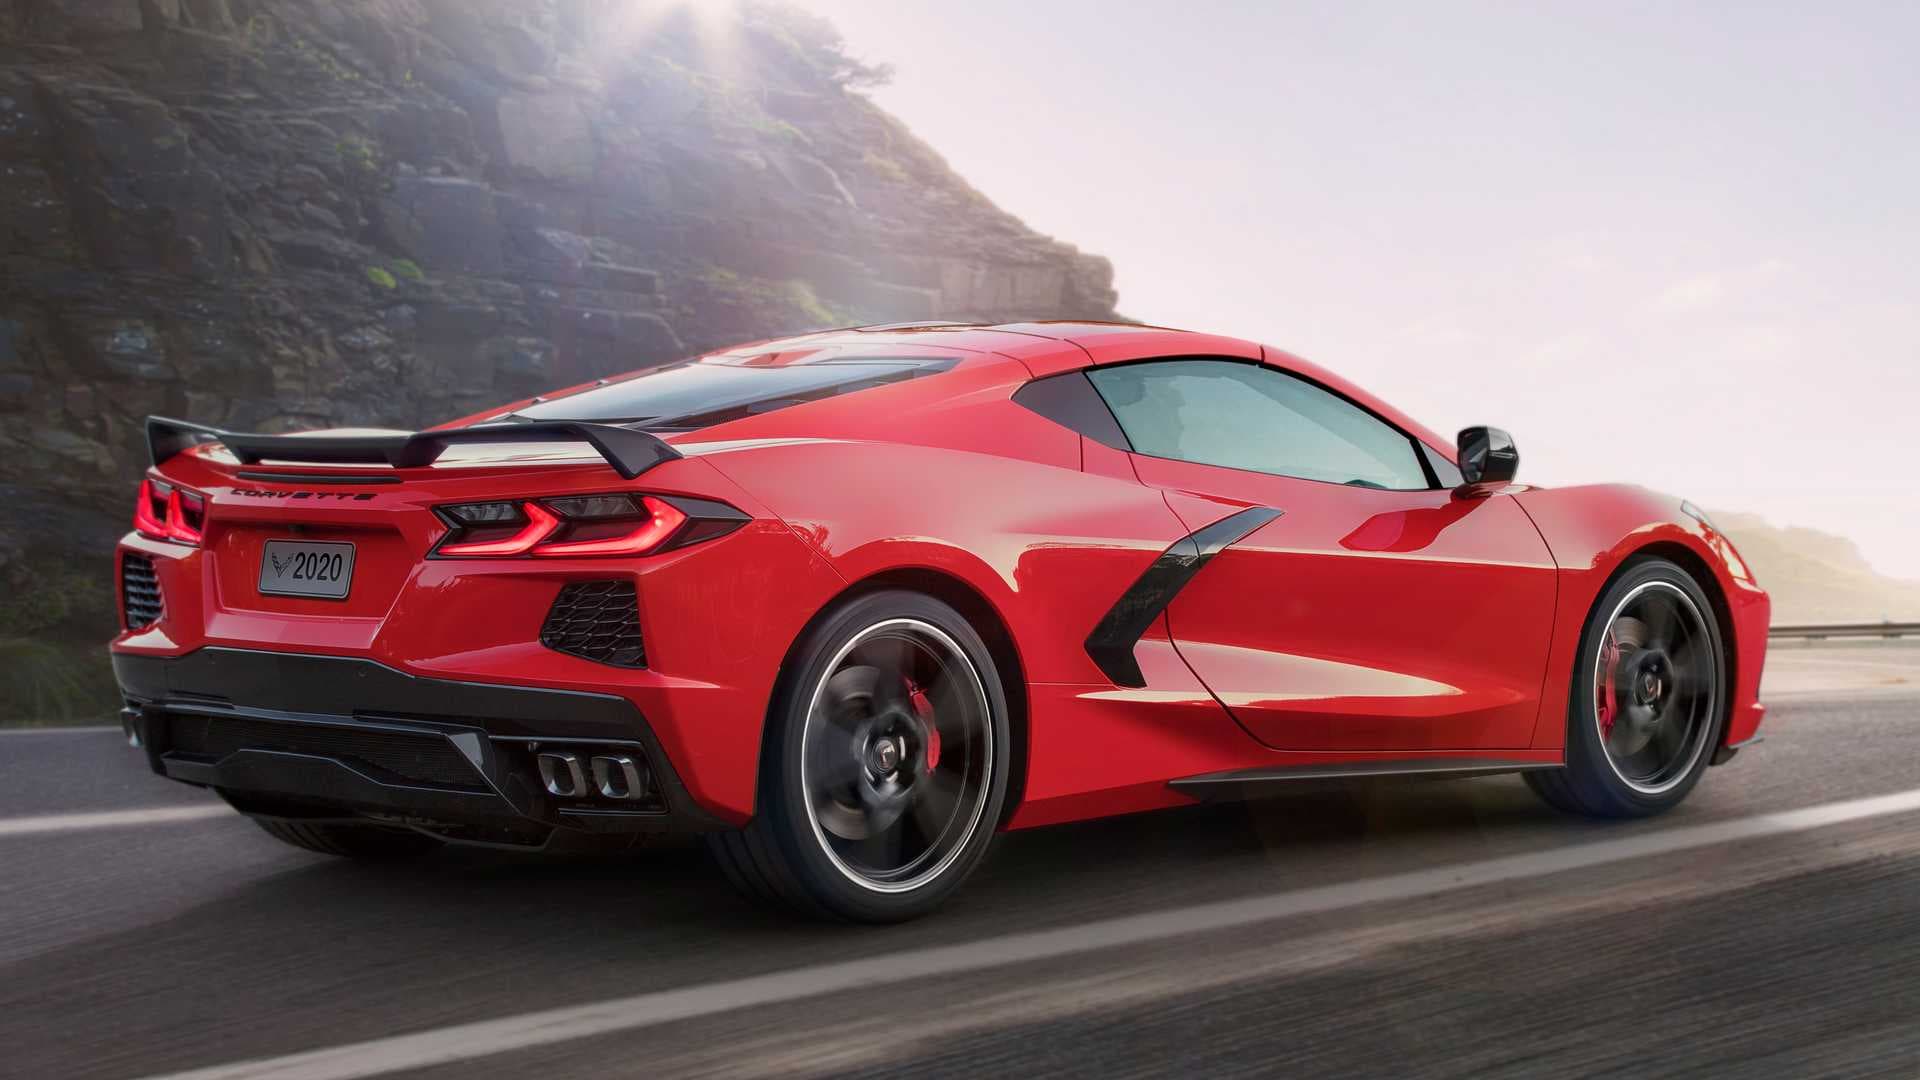 2020 Chevrolet Corvette C8 With Z51 Package Does 0-60 in Just 2.9 Seconds